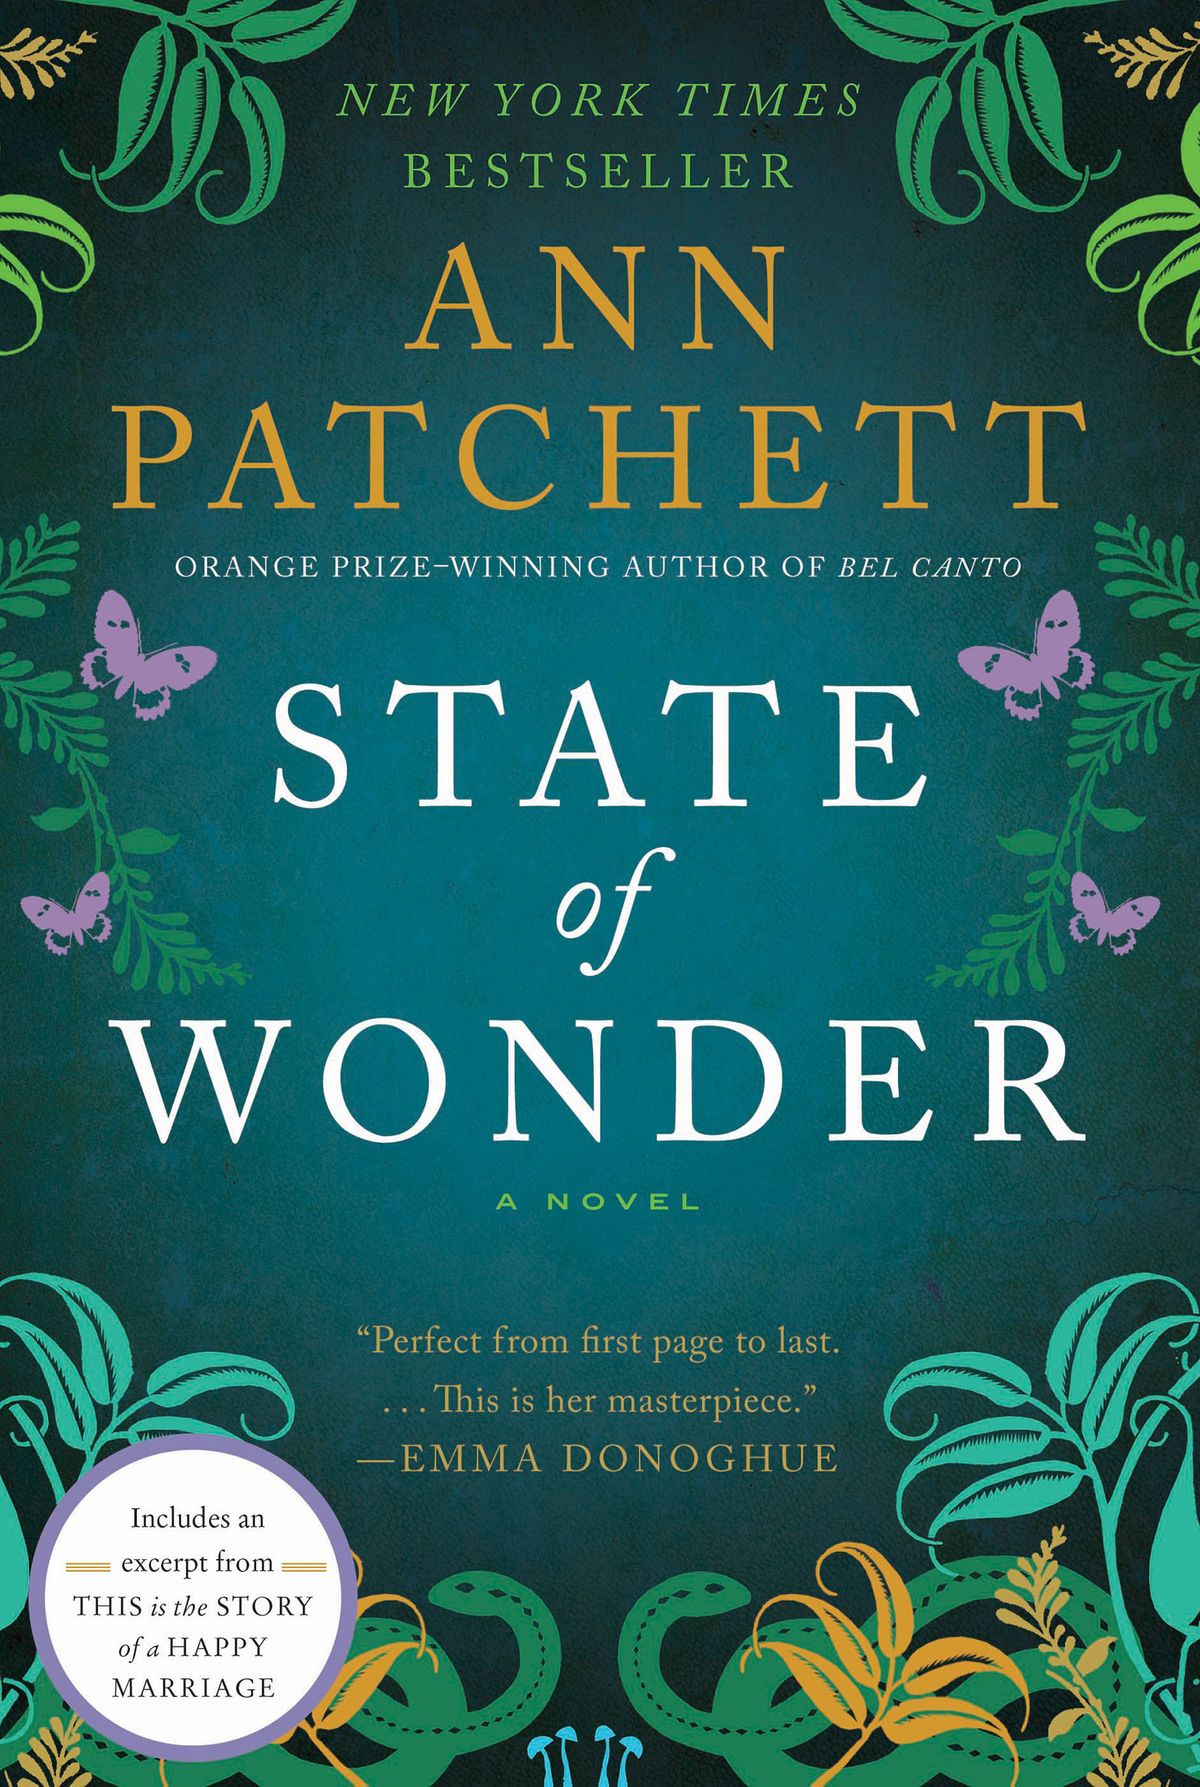 Image for "State of Wonder"